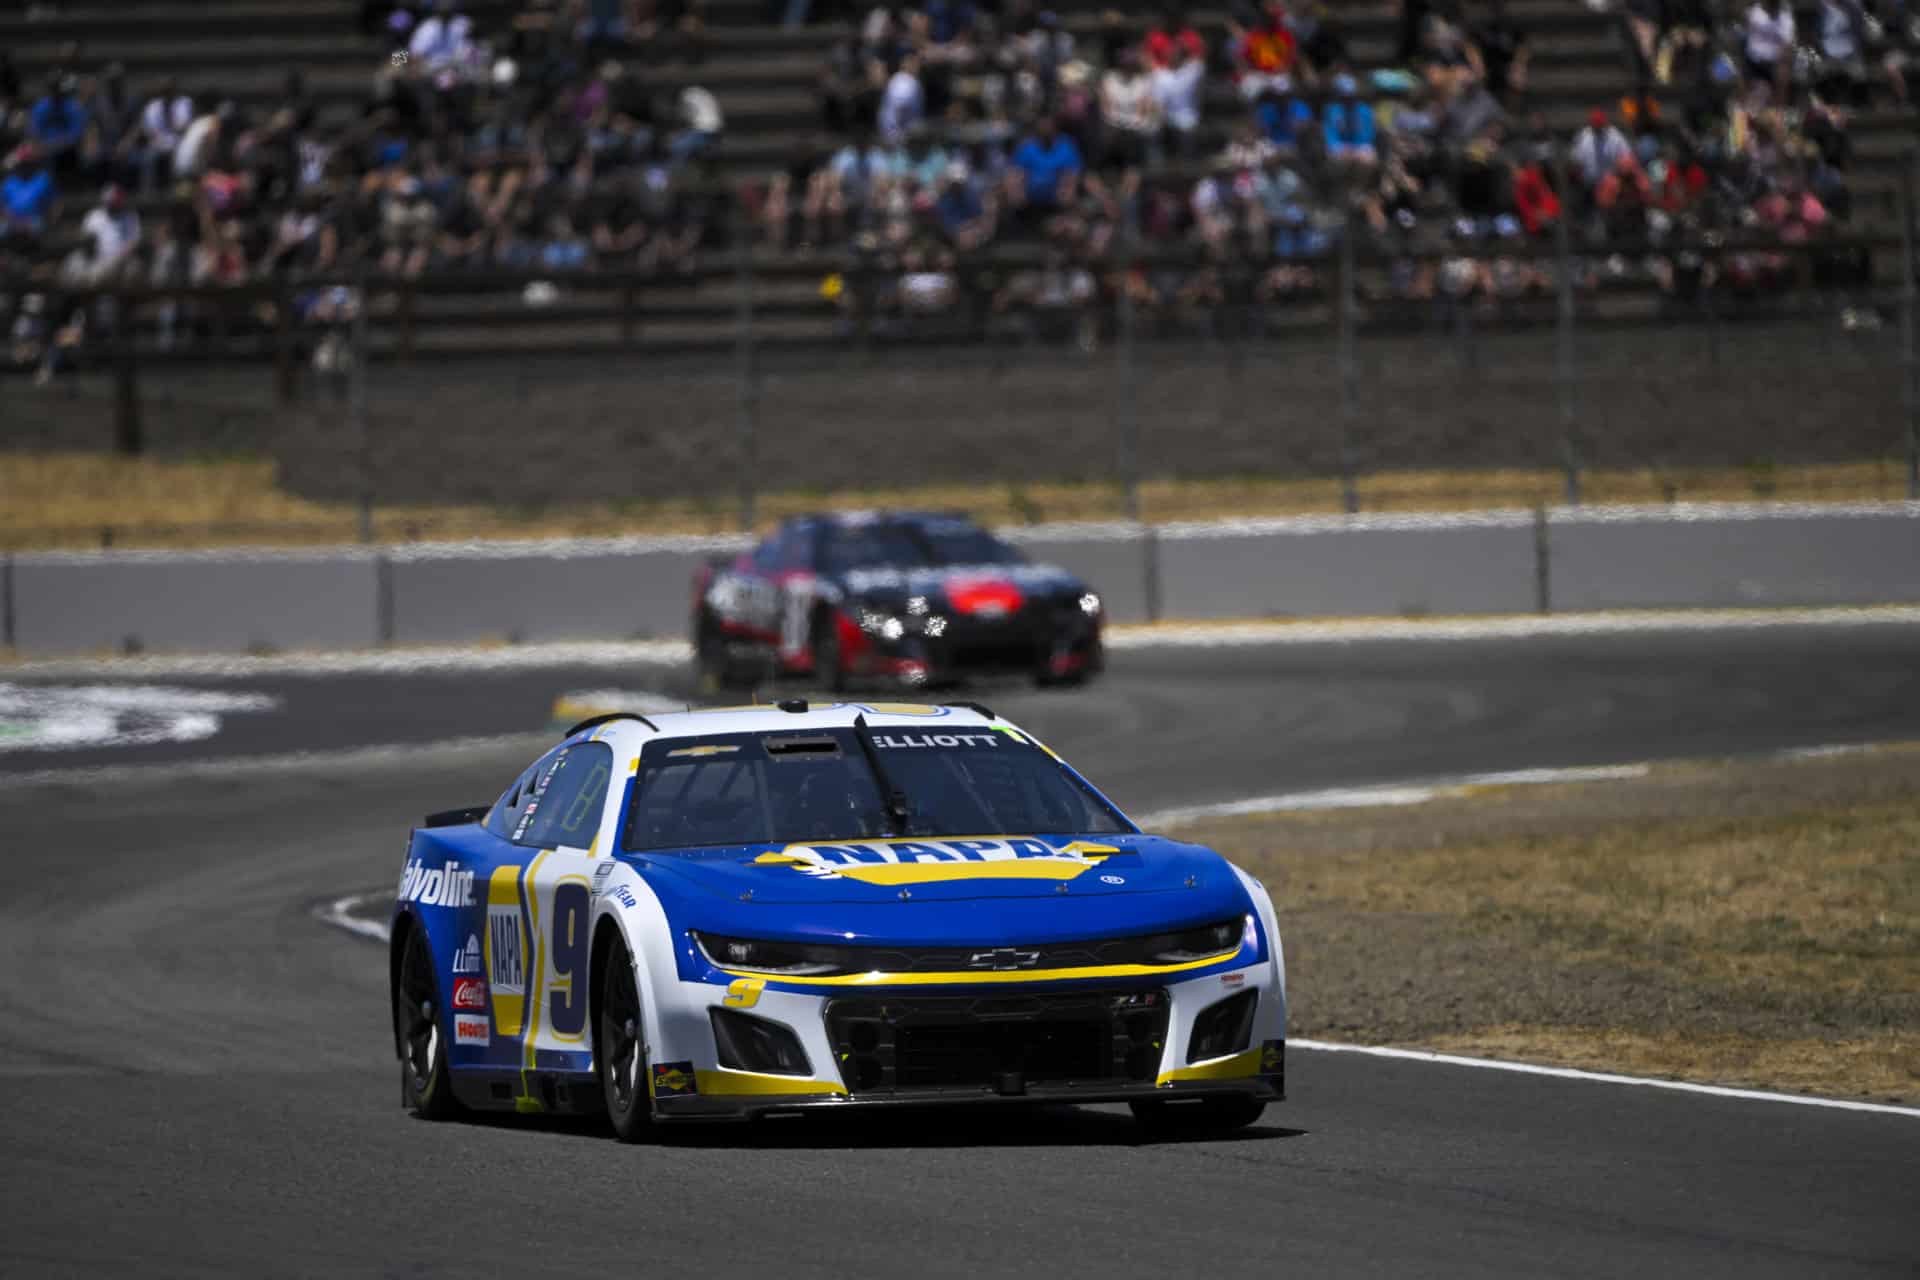 Chase Elliott's return from a one-week suspension resulted in a top-five finish in the NASCAR Cup Series race at Sonoma Raceway.